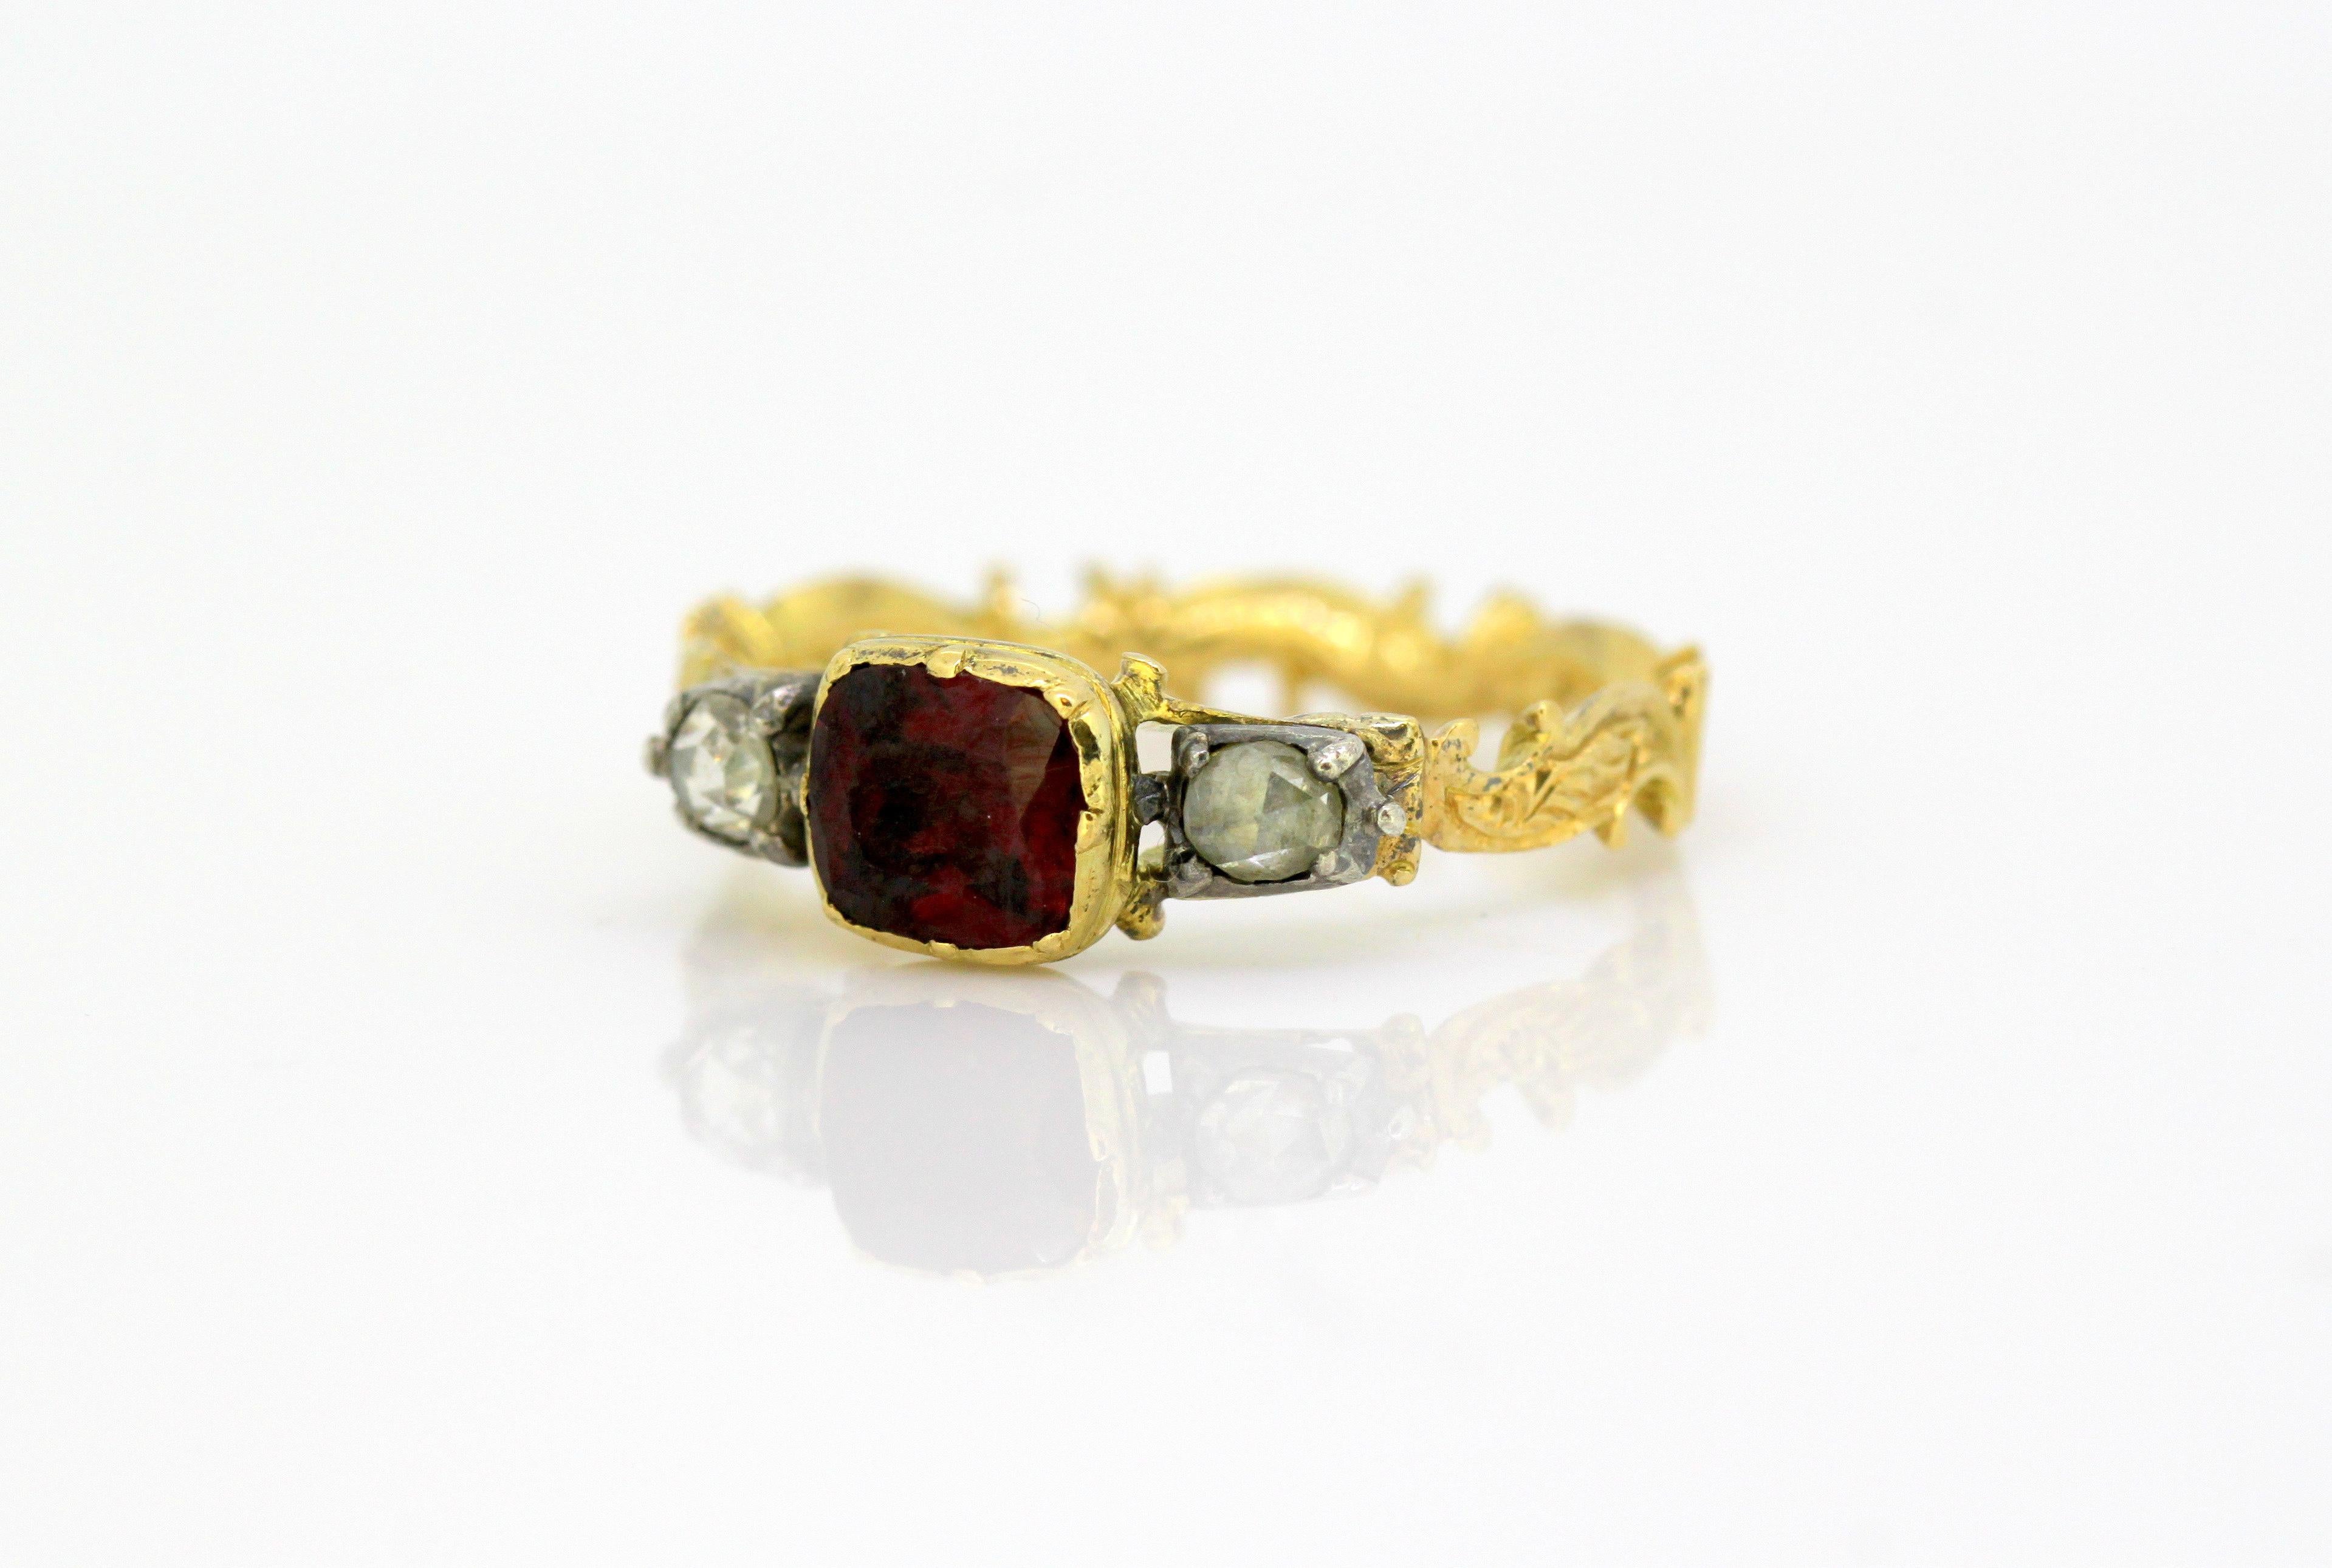 Antique Victorian 15k gold ring with ruby and diamonds
Made in England Circa 1860's
Tested positive for 15kt yellow gold.

Dimensions -
Finger Size: (UK) = M (US) = 6 1/2 (EU) = 52 1/2
Size : 2.3 x 2.2 x 0.6 cm
Weight: 3 grams total

Diamonds -